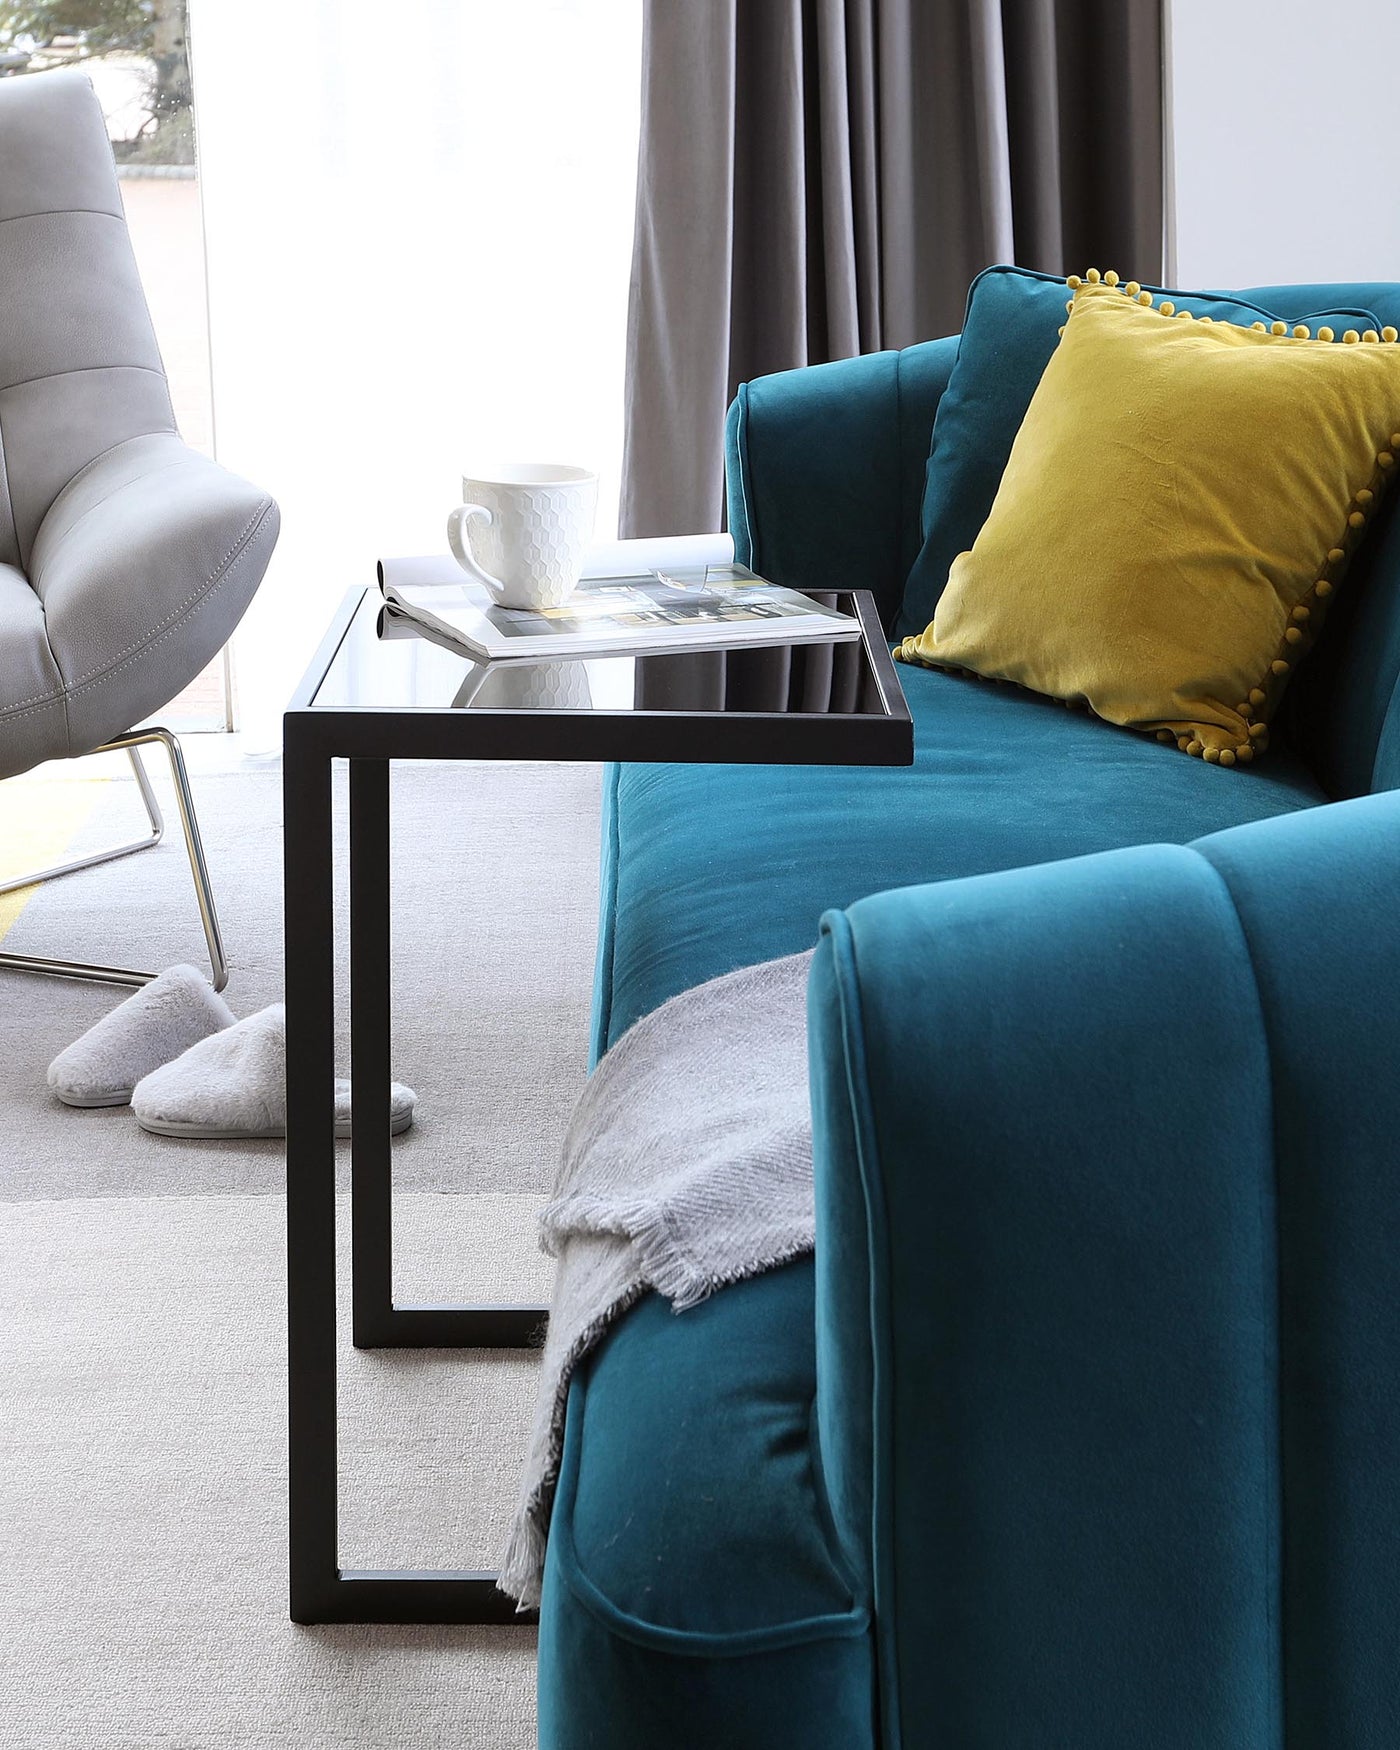 A modern living room setting featuring a plush teal sofa adorned with a vibrant yellow decorative pillow and a light grey throw blanket draped casually on one side. In front, a sleek, minimalist black metal C-table with a rectangular top holds a white cup and a magazine, offering both style and functionality. A grey upholstered accent chair with a curved back and angled metal legs provides additional seating, enhancing the contemporary aesthetic of the space.